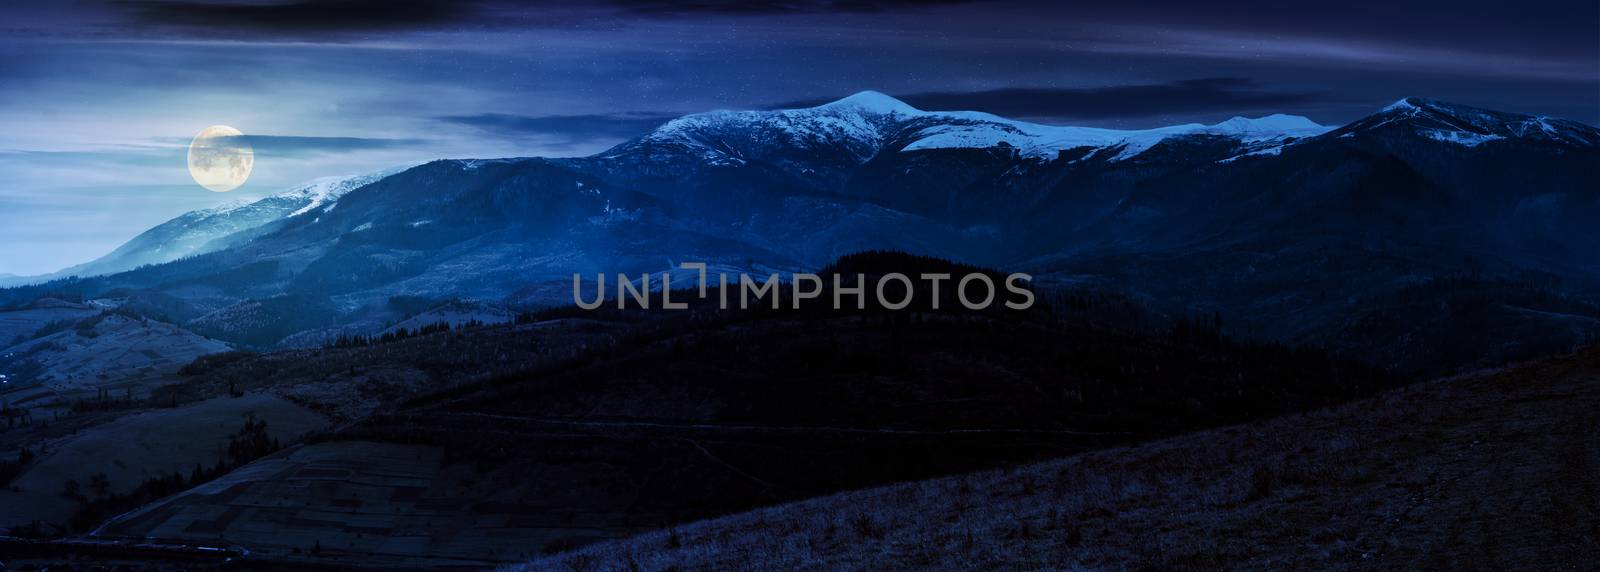 great mountain ridge Borzhava with snowy tops at night in full moon light. beautiful countryside landscape in late autumn